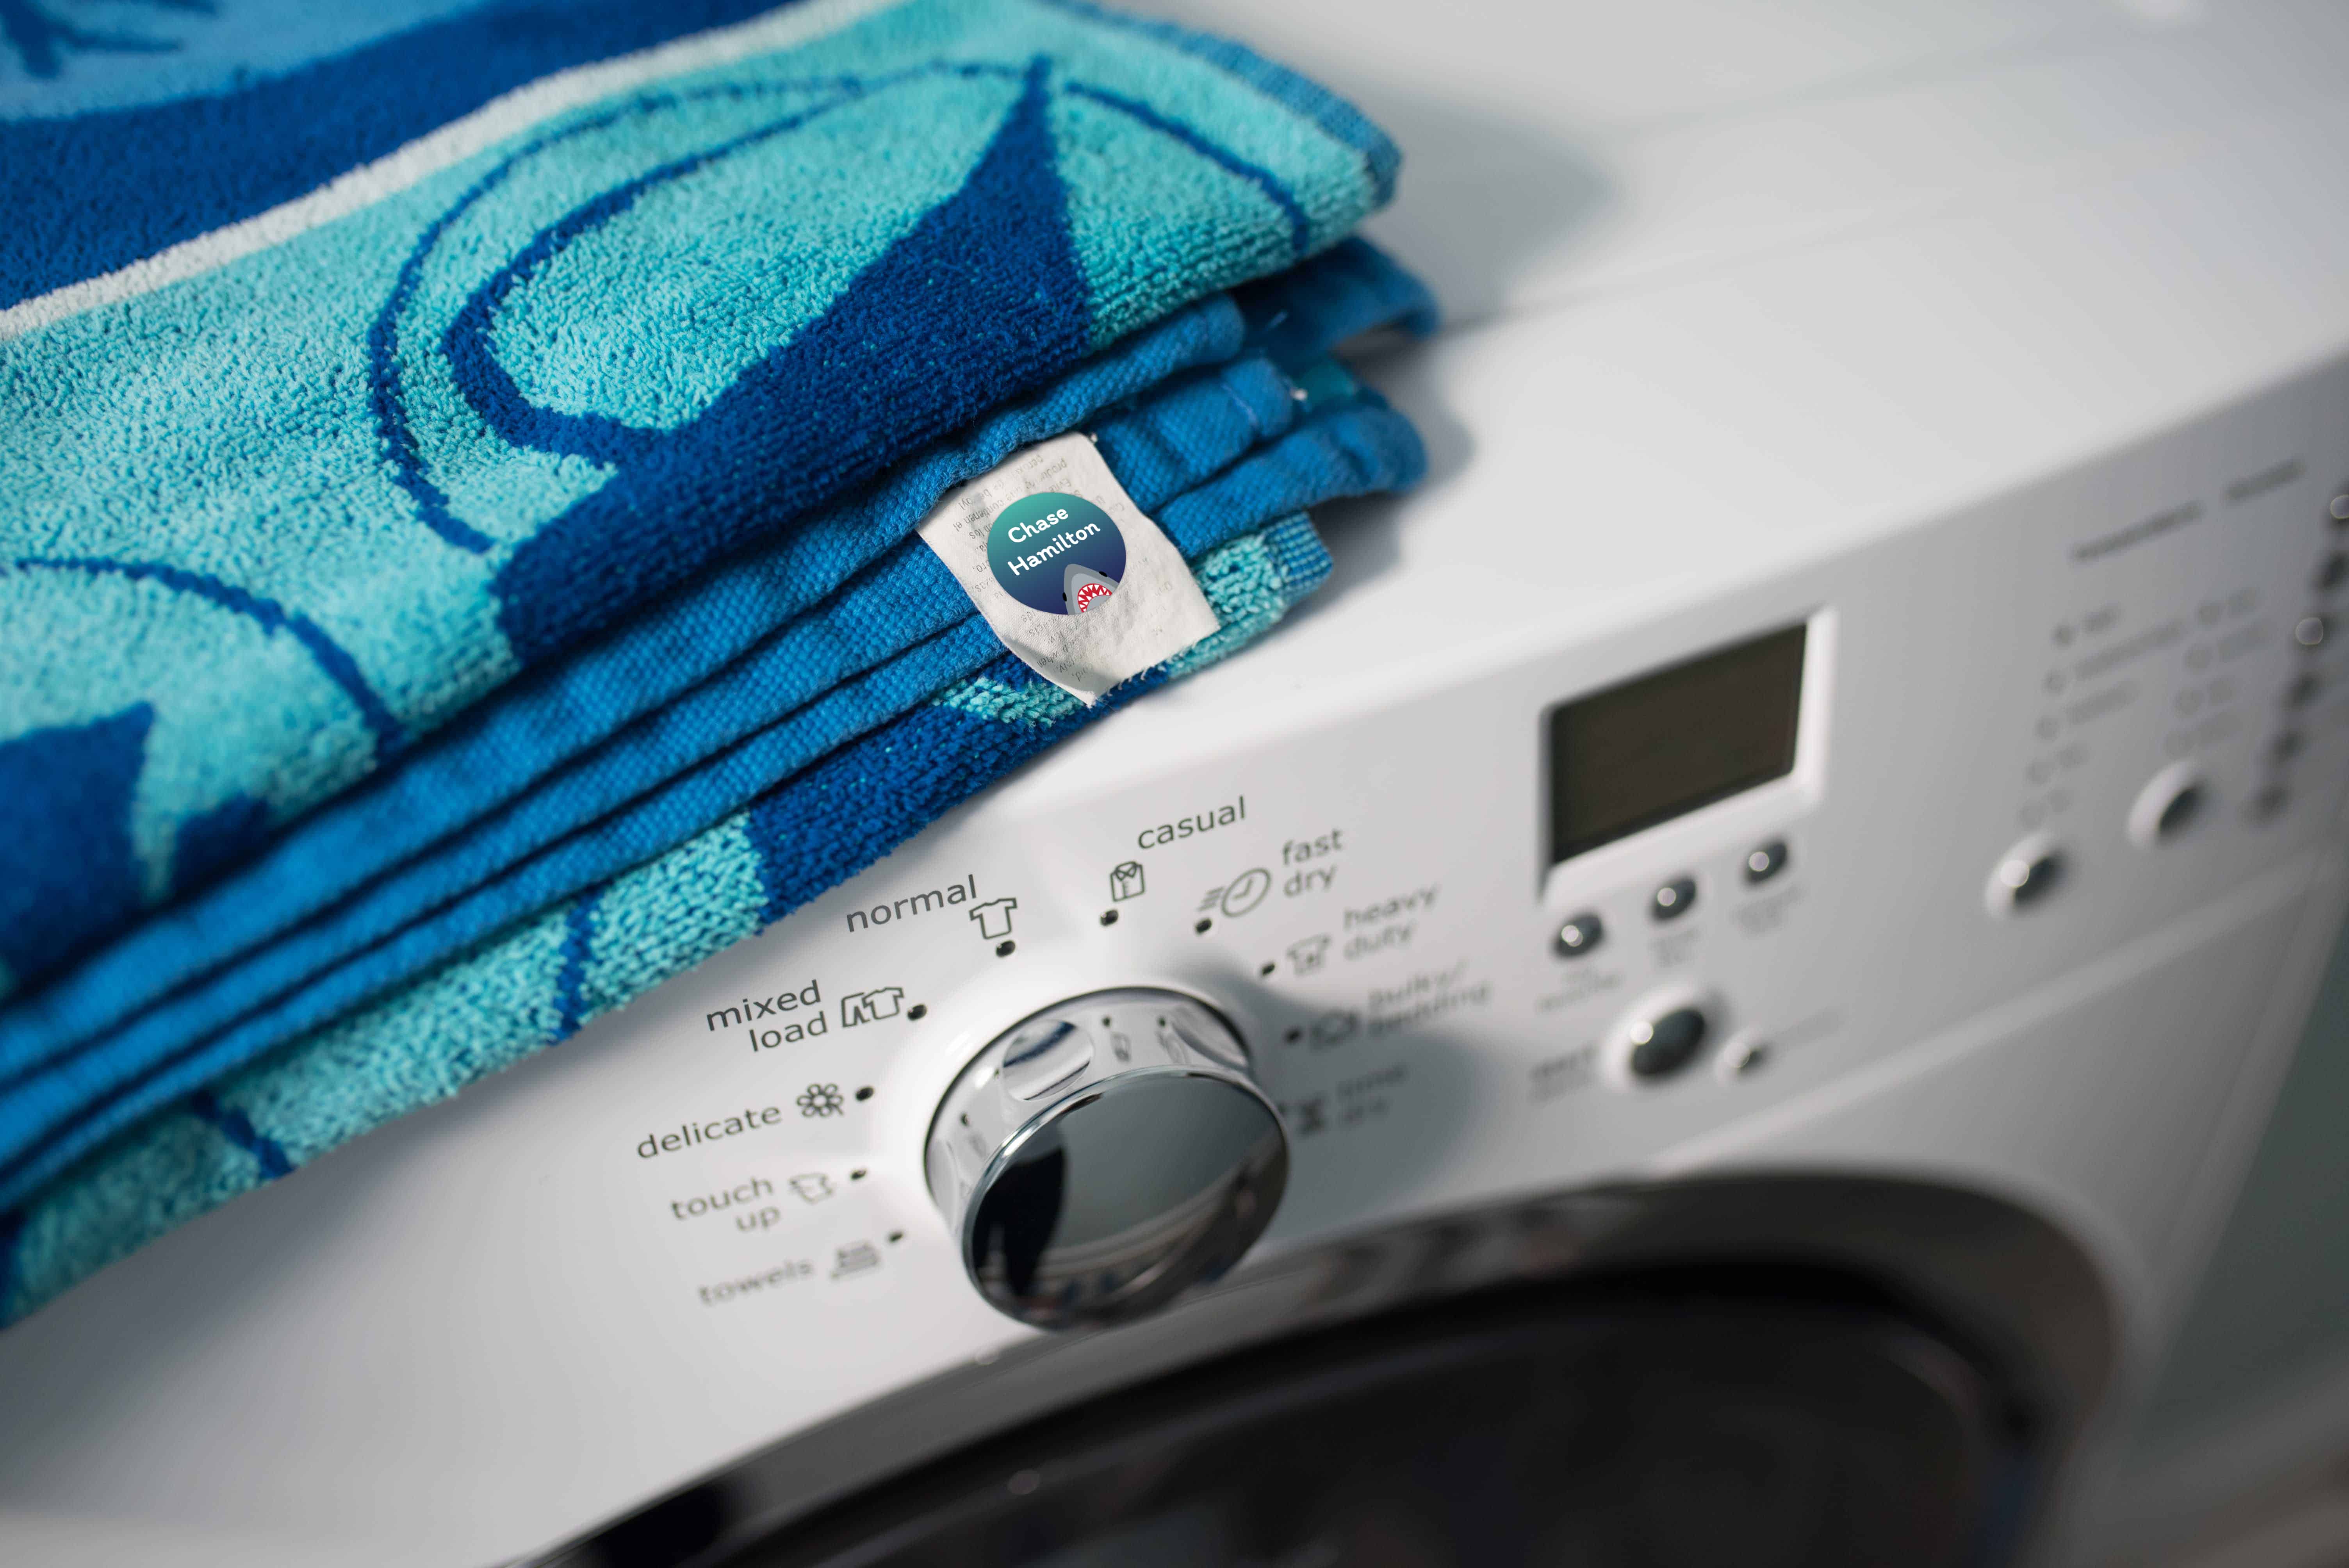 blue beach towel with a label on a white washing machine